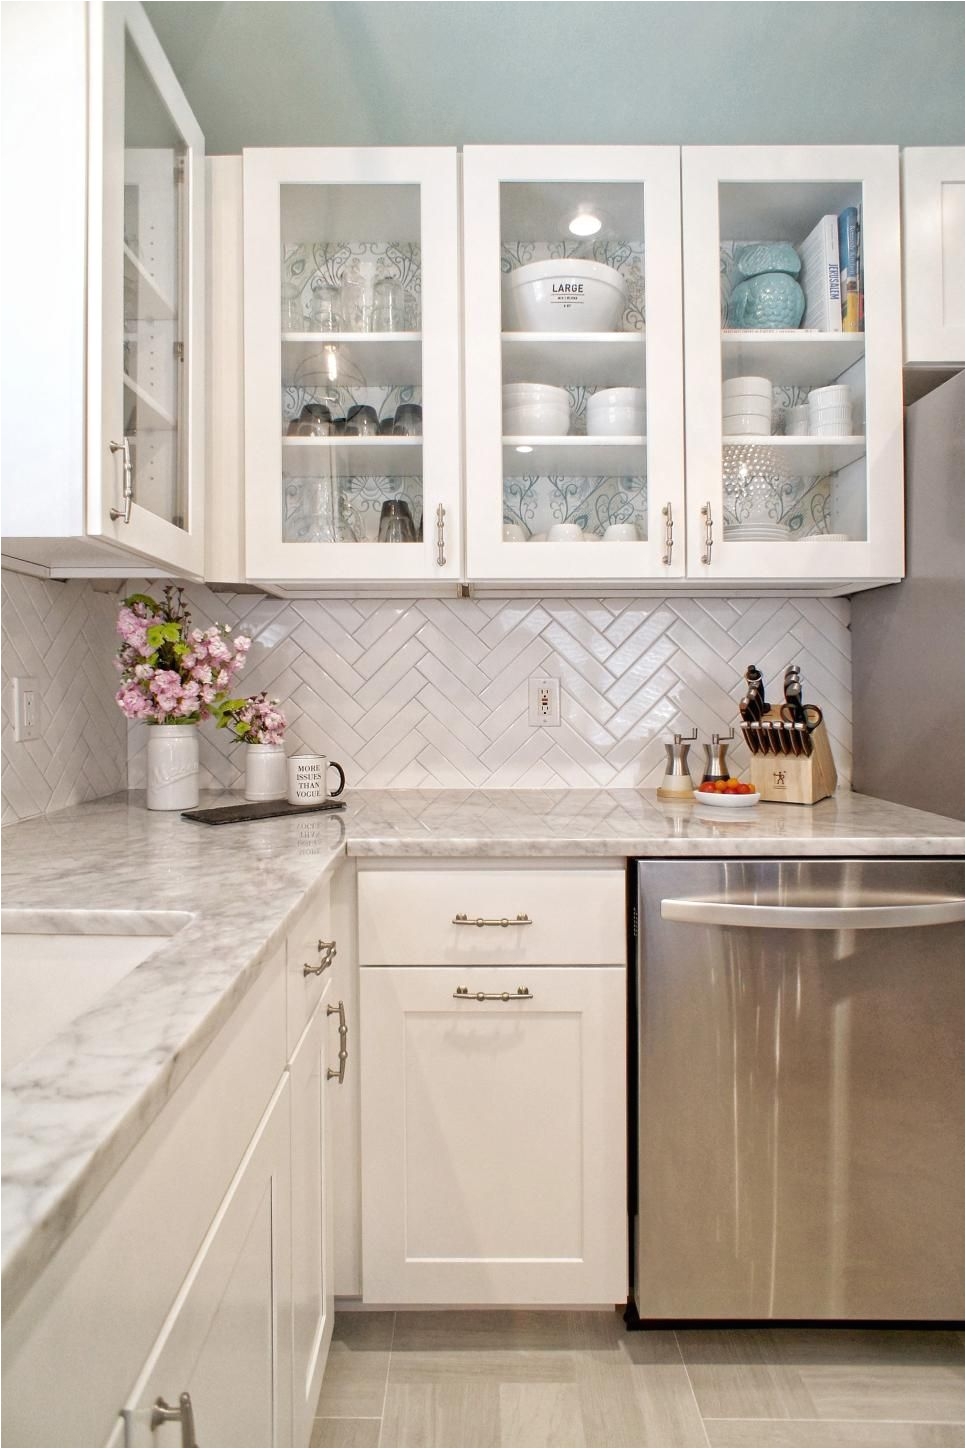 Floor and Decor Marble Countertops Our 25 Most Pinned Photos Of 2016 Pinterest Herringbone